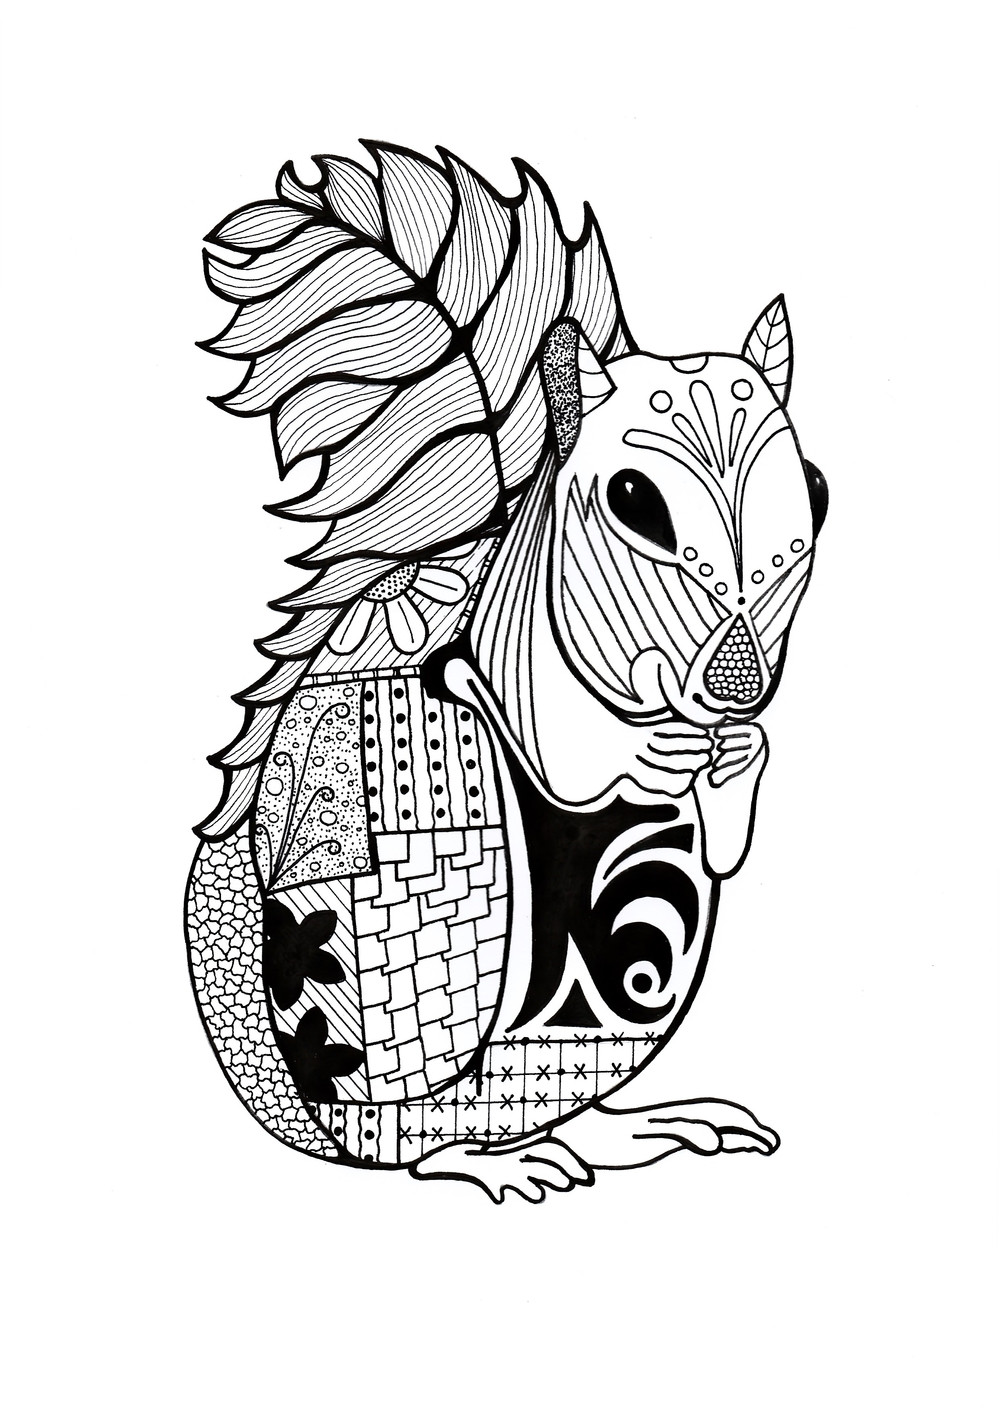 Animals Coloring Pages For Adults
 Intricate Squirrel Adult Coloring Page